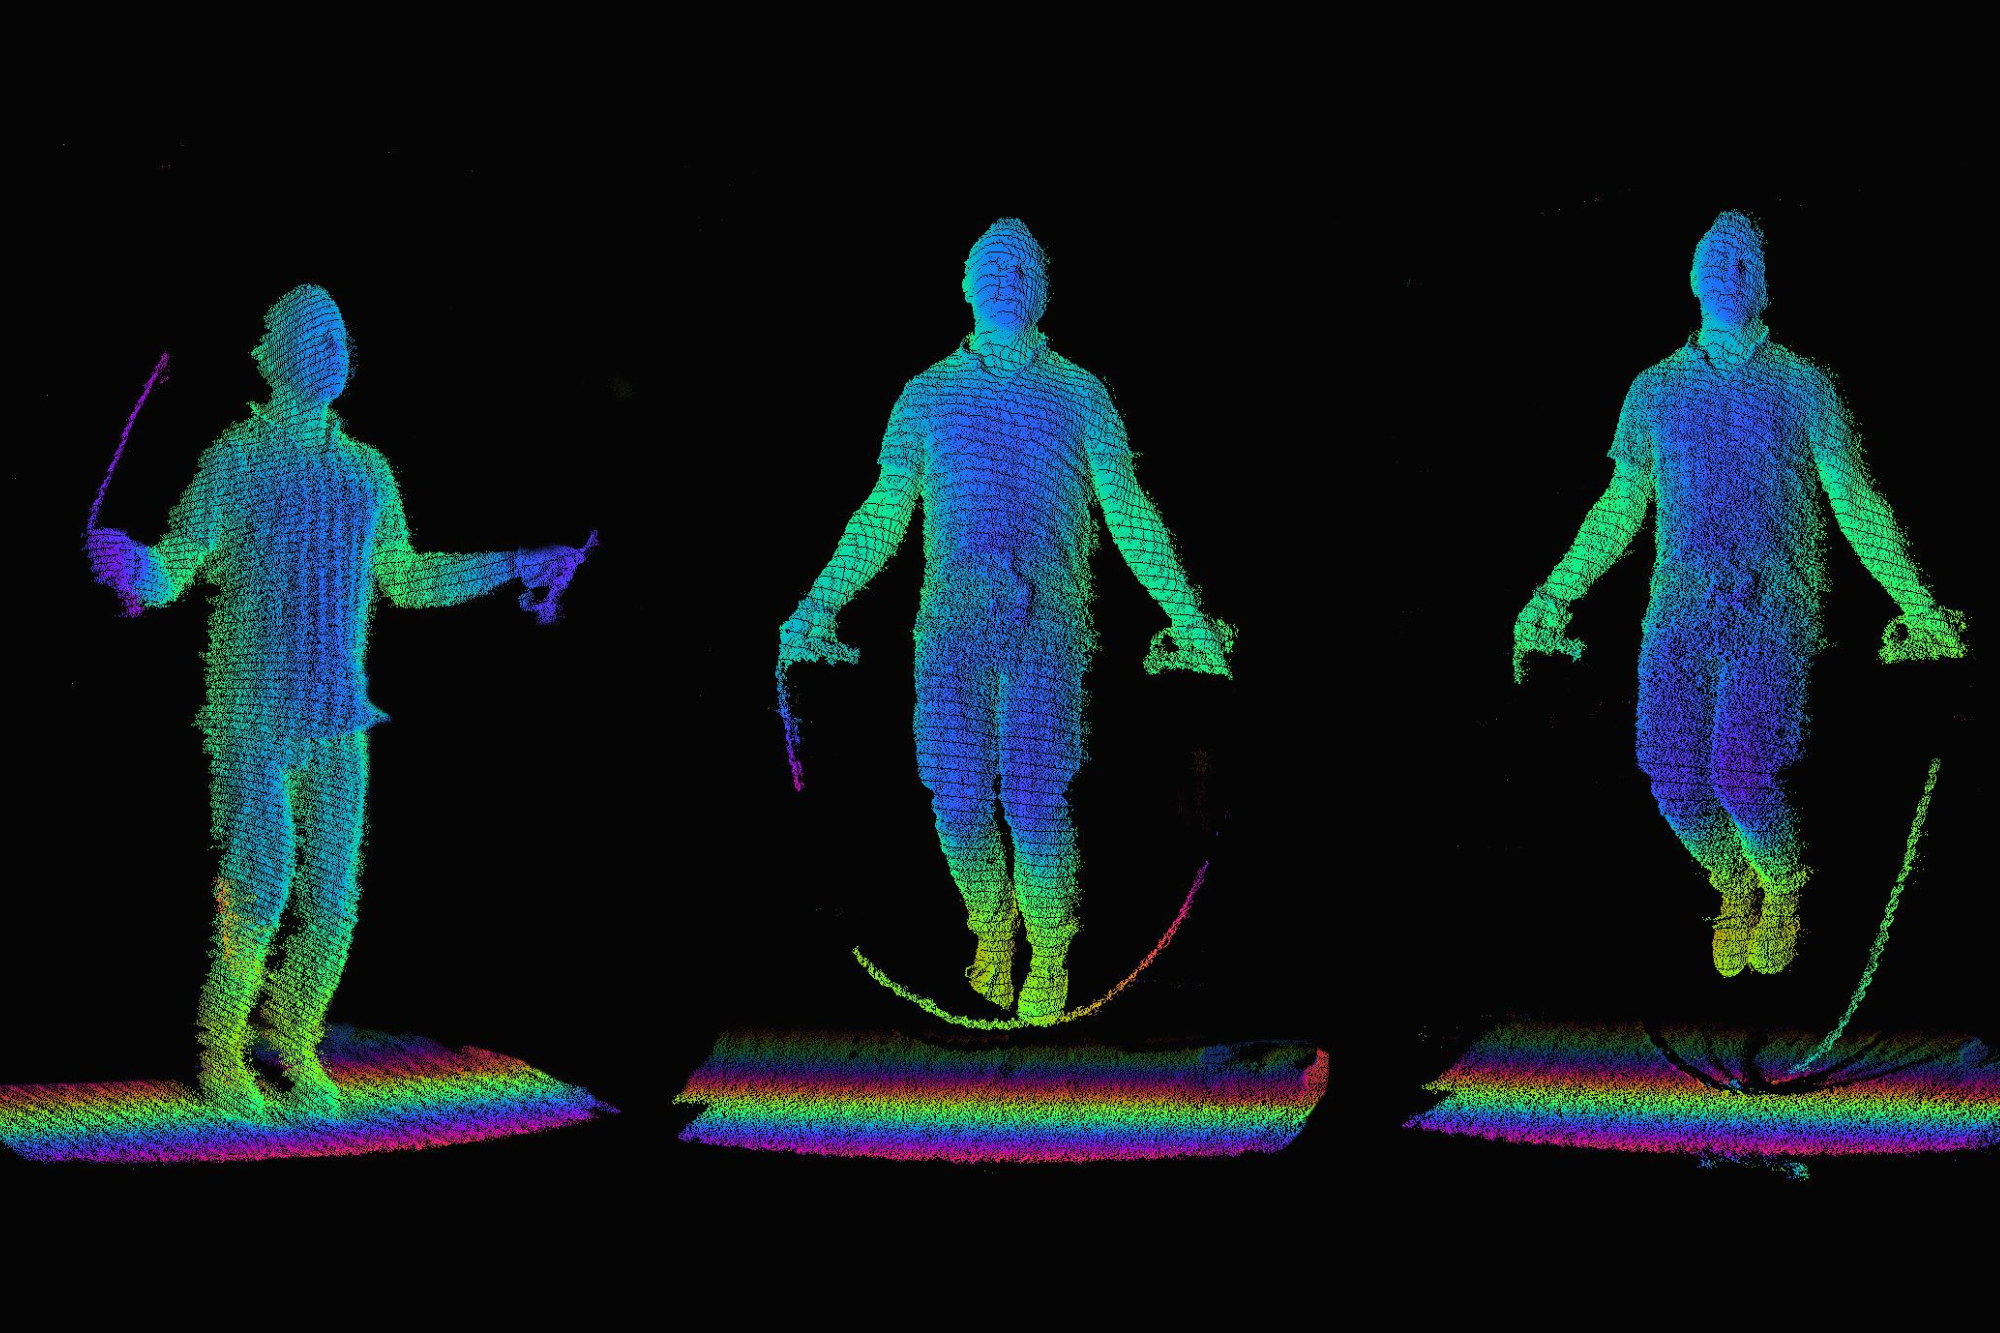 3D measurement of a highly dynamic scene (rope jumper).